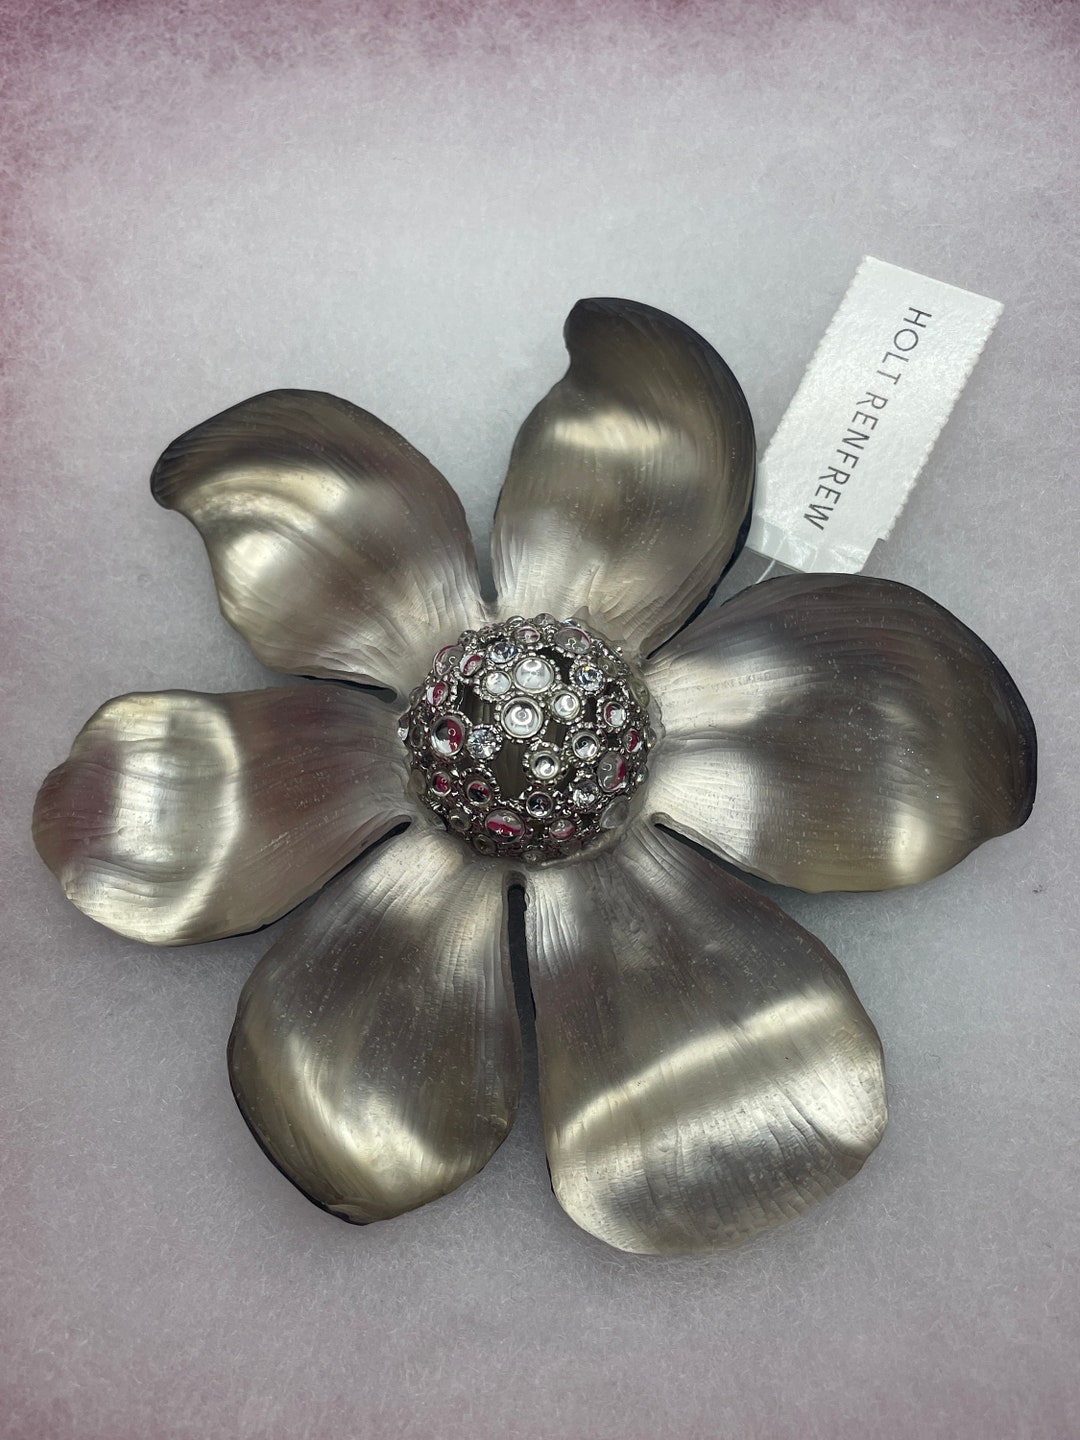 ALEXIS BITTAR Brooch Pin Lucite Flower Vintage New With Tags - Etsy